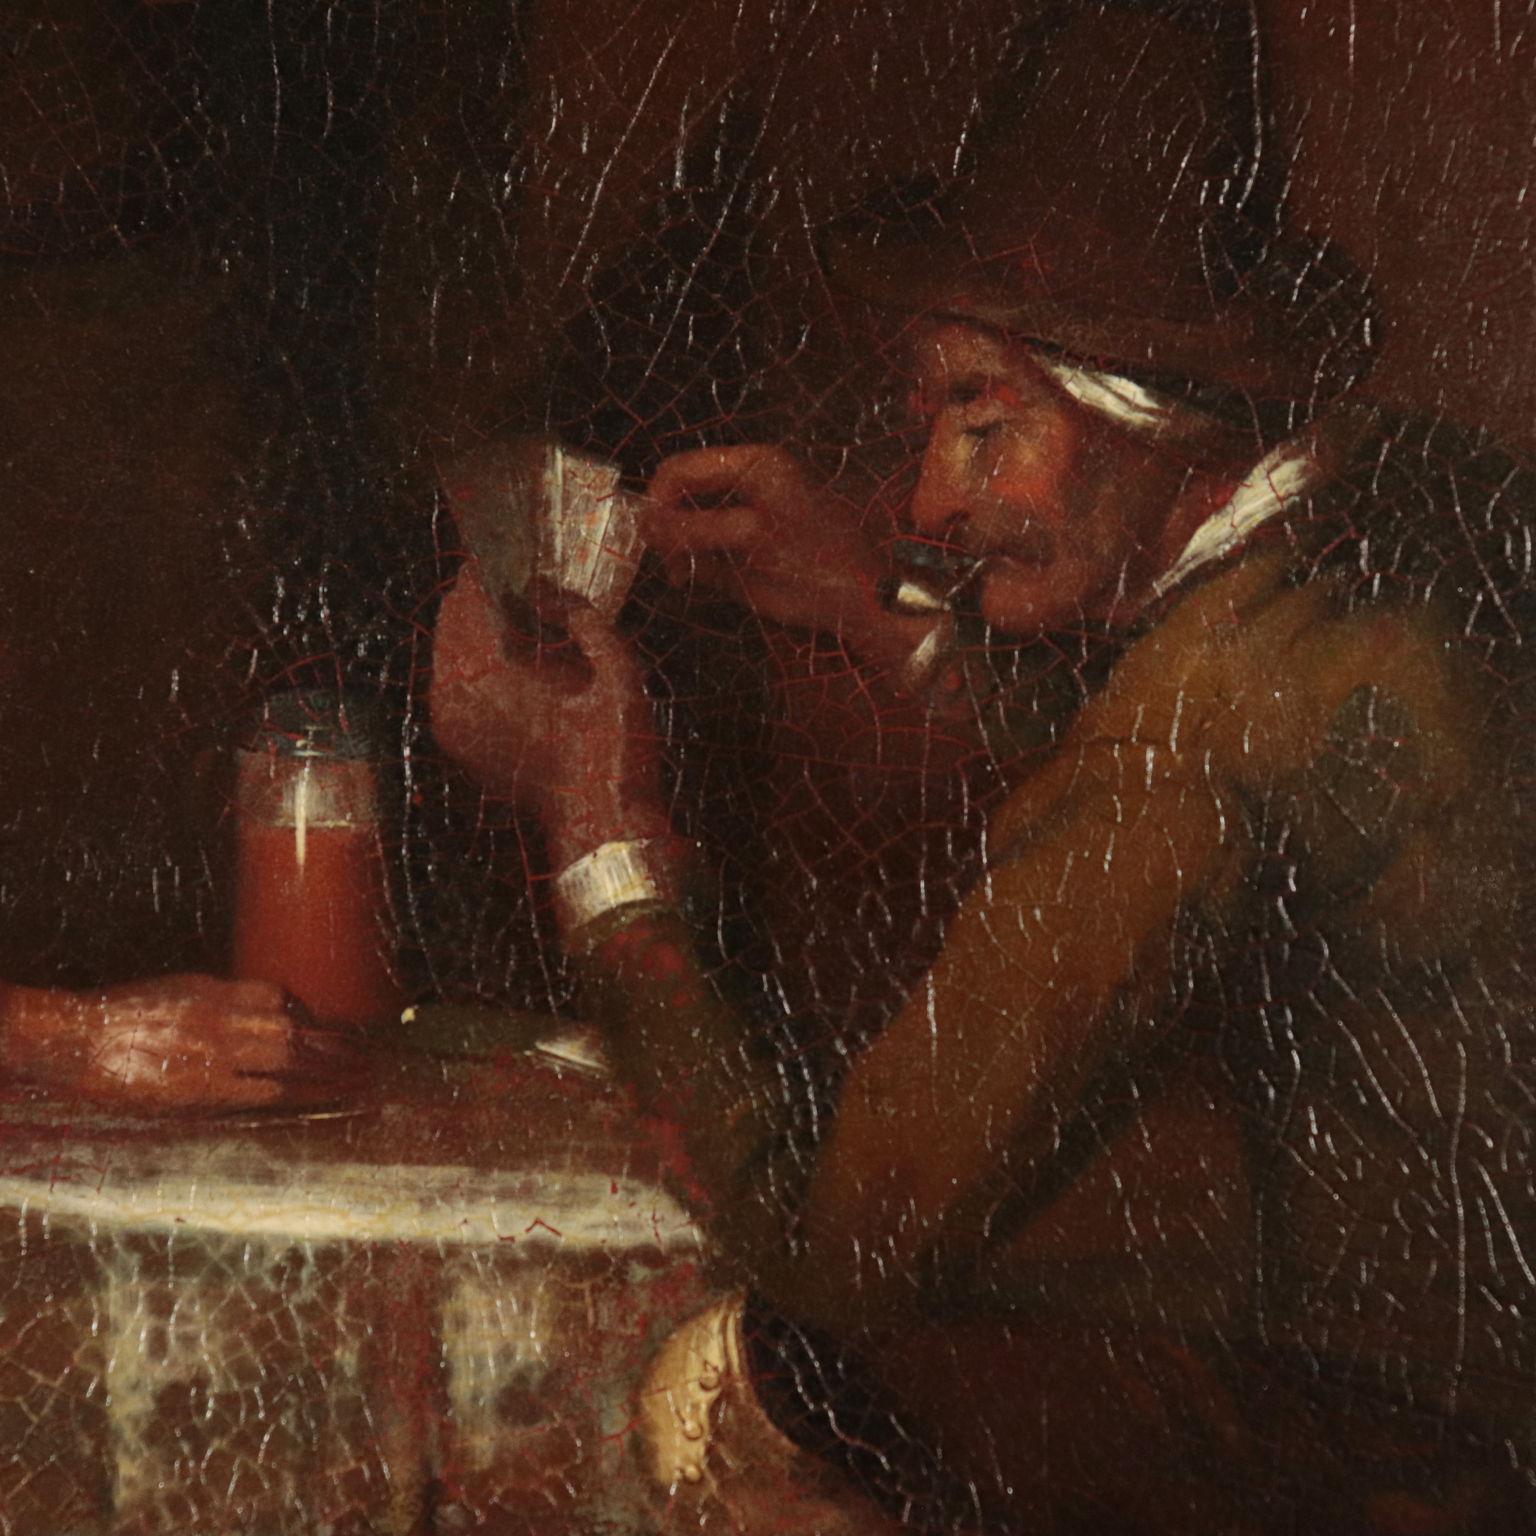 The players of Cards, Oil on Metal Plate, 19th Century - Brown Figurative Painting by Unknown